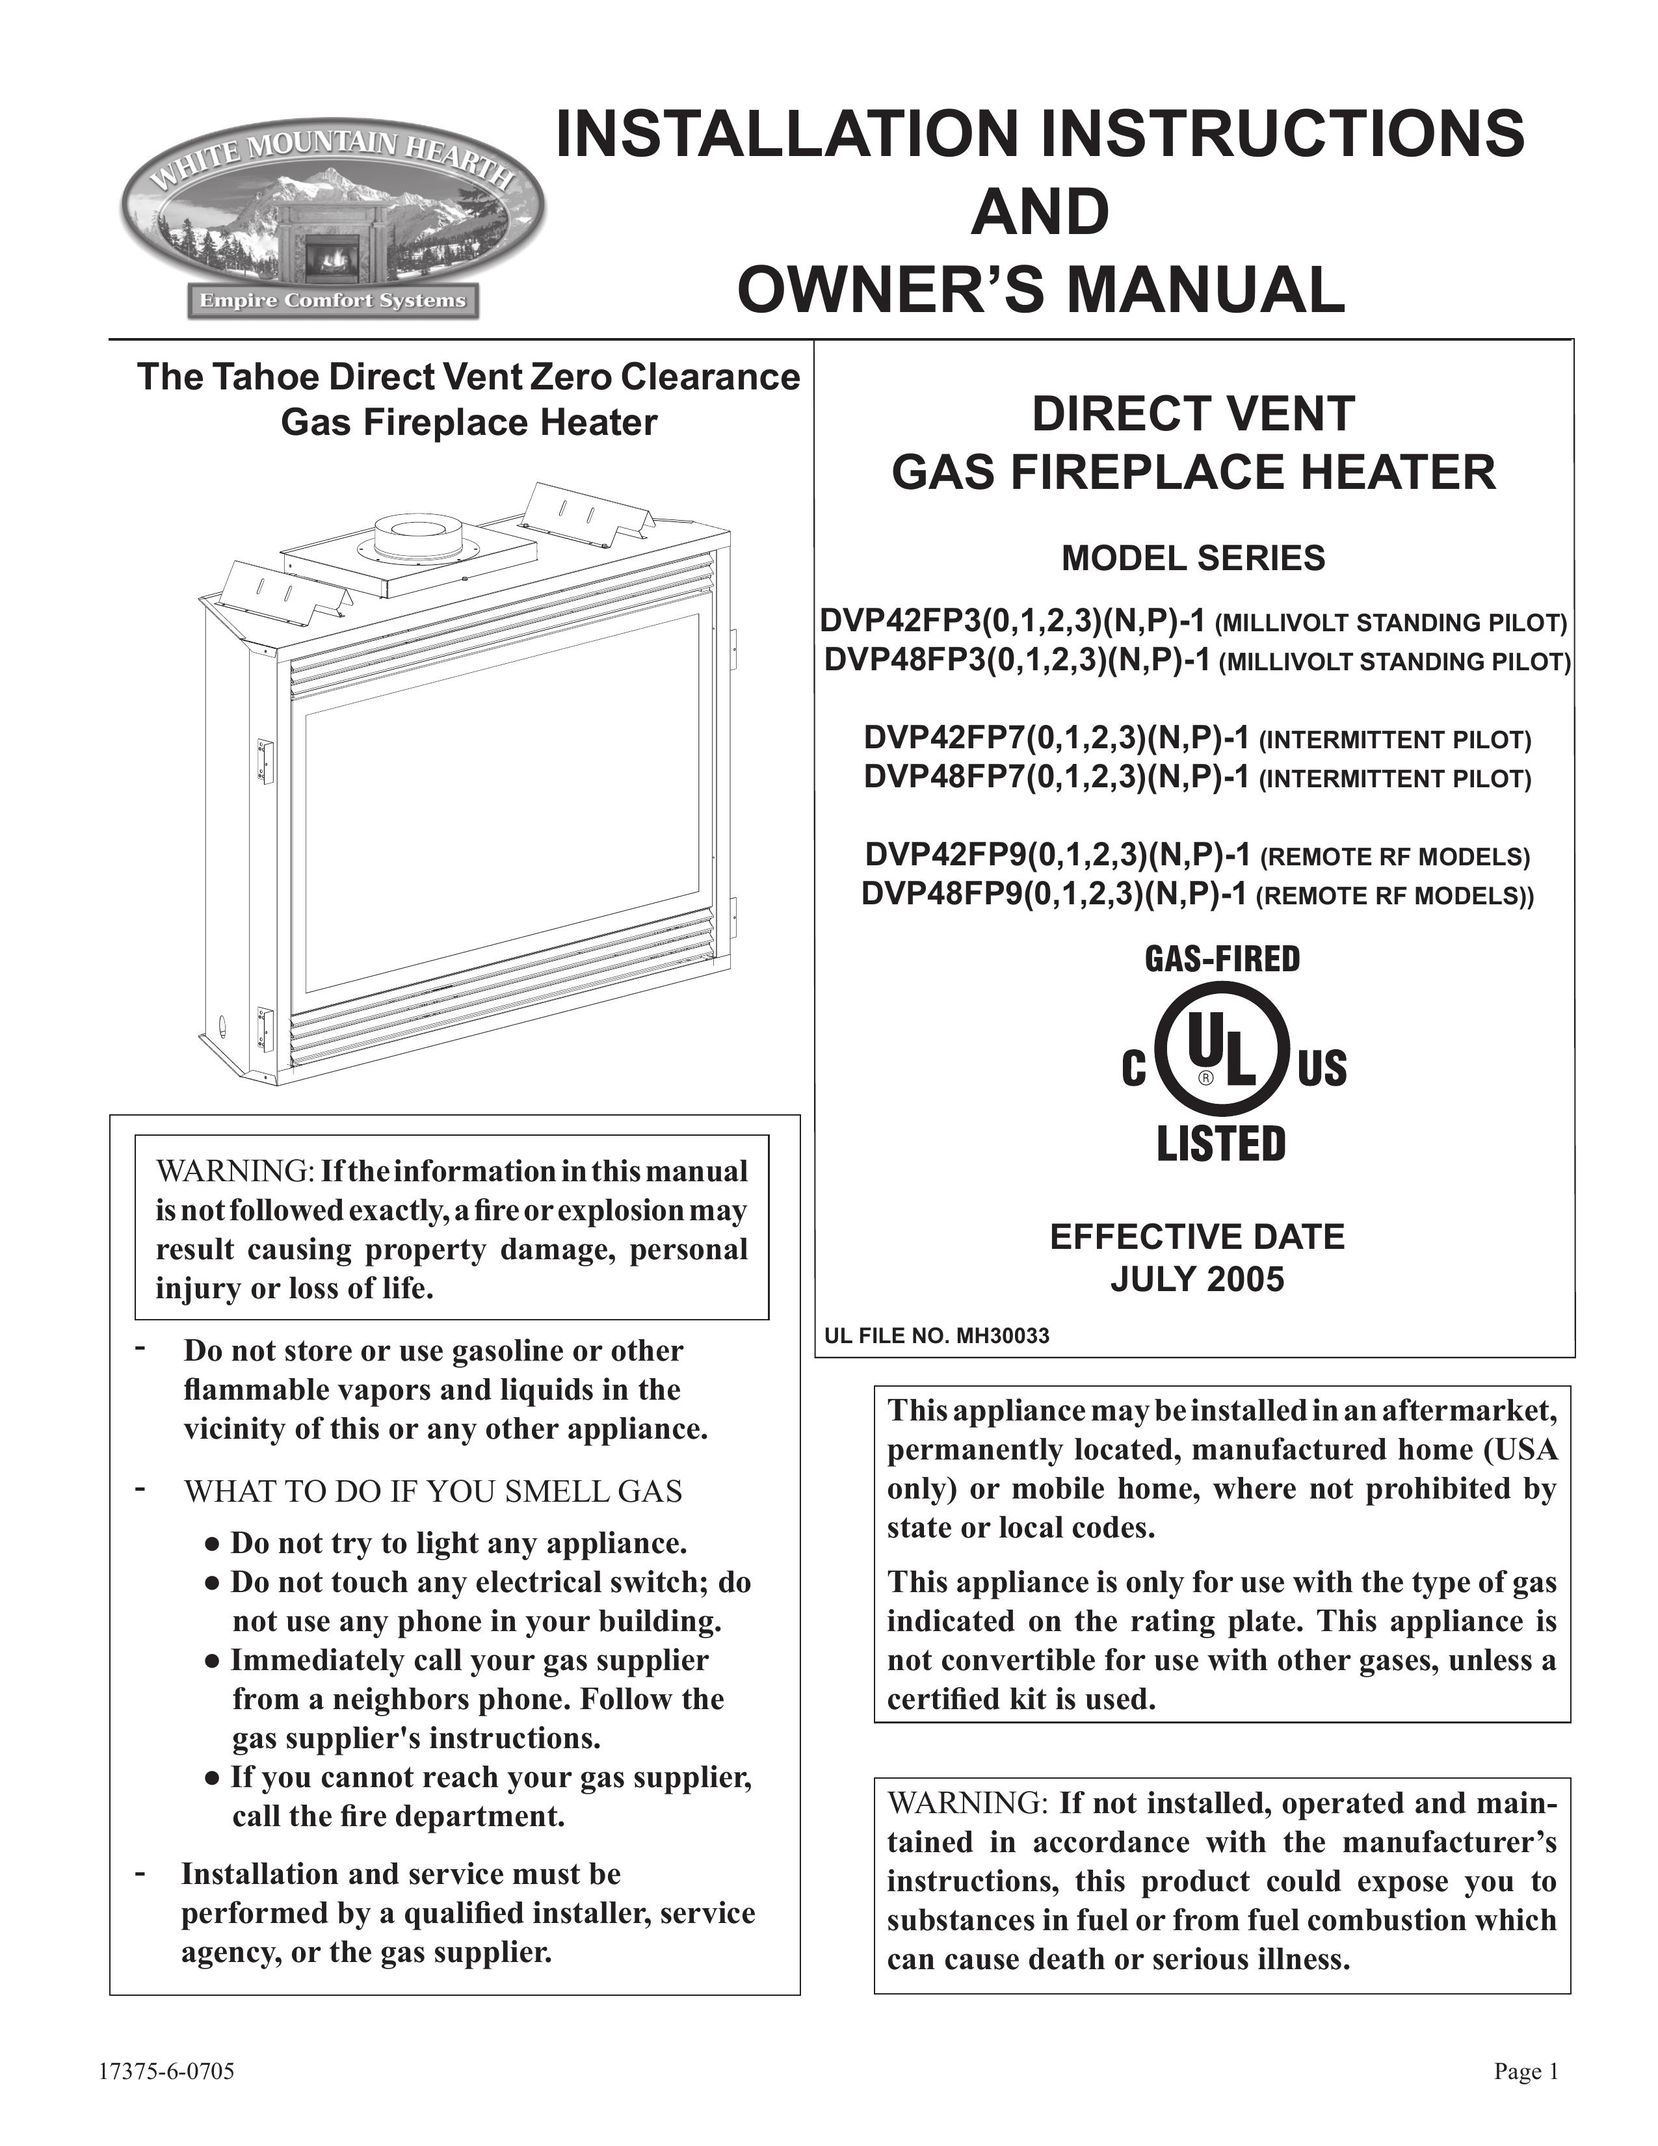 Empire Comfort Systems DVP48FP3 Water Heater User Manual